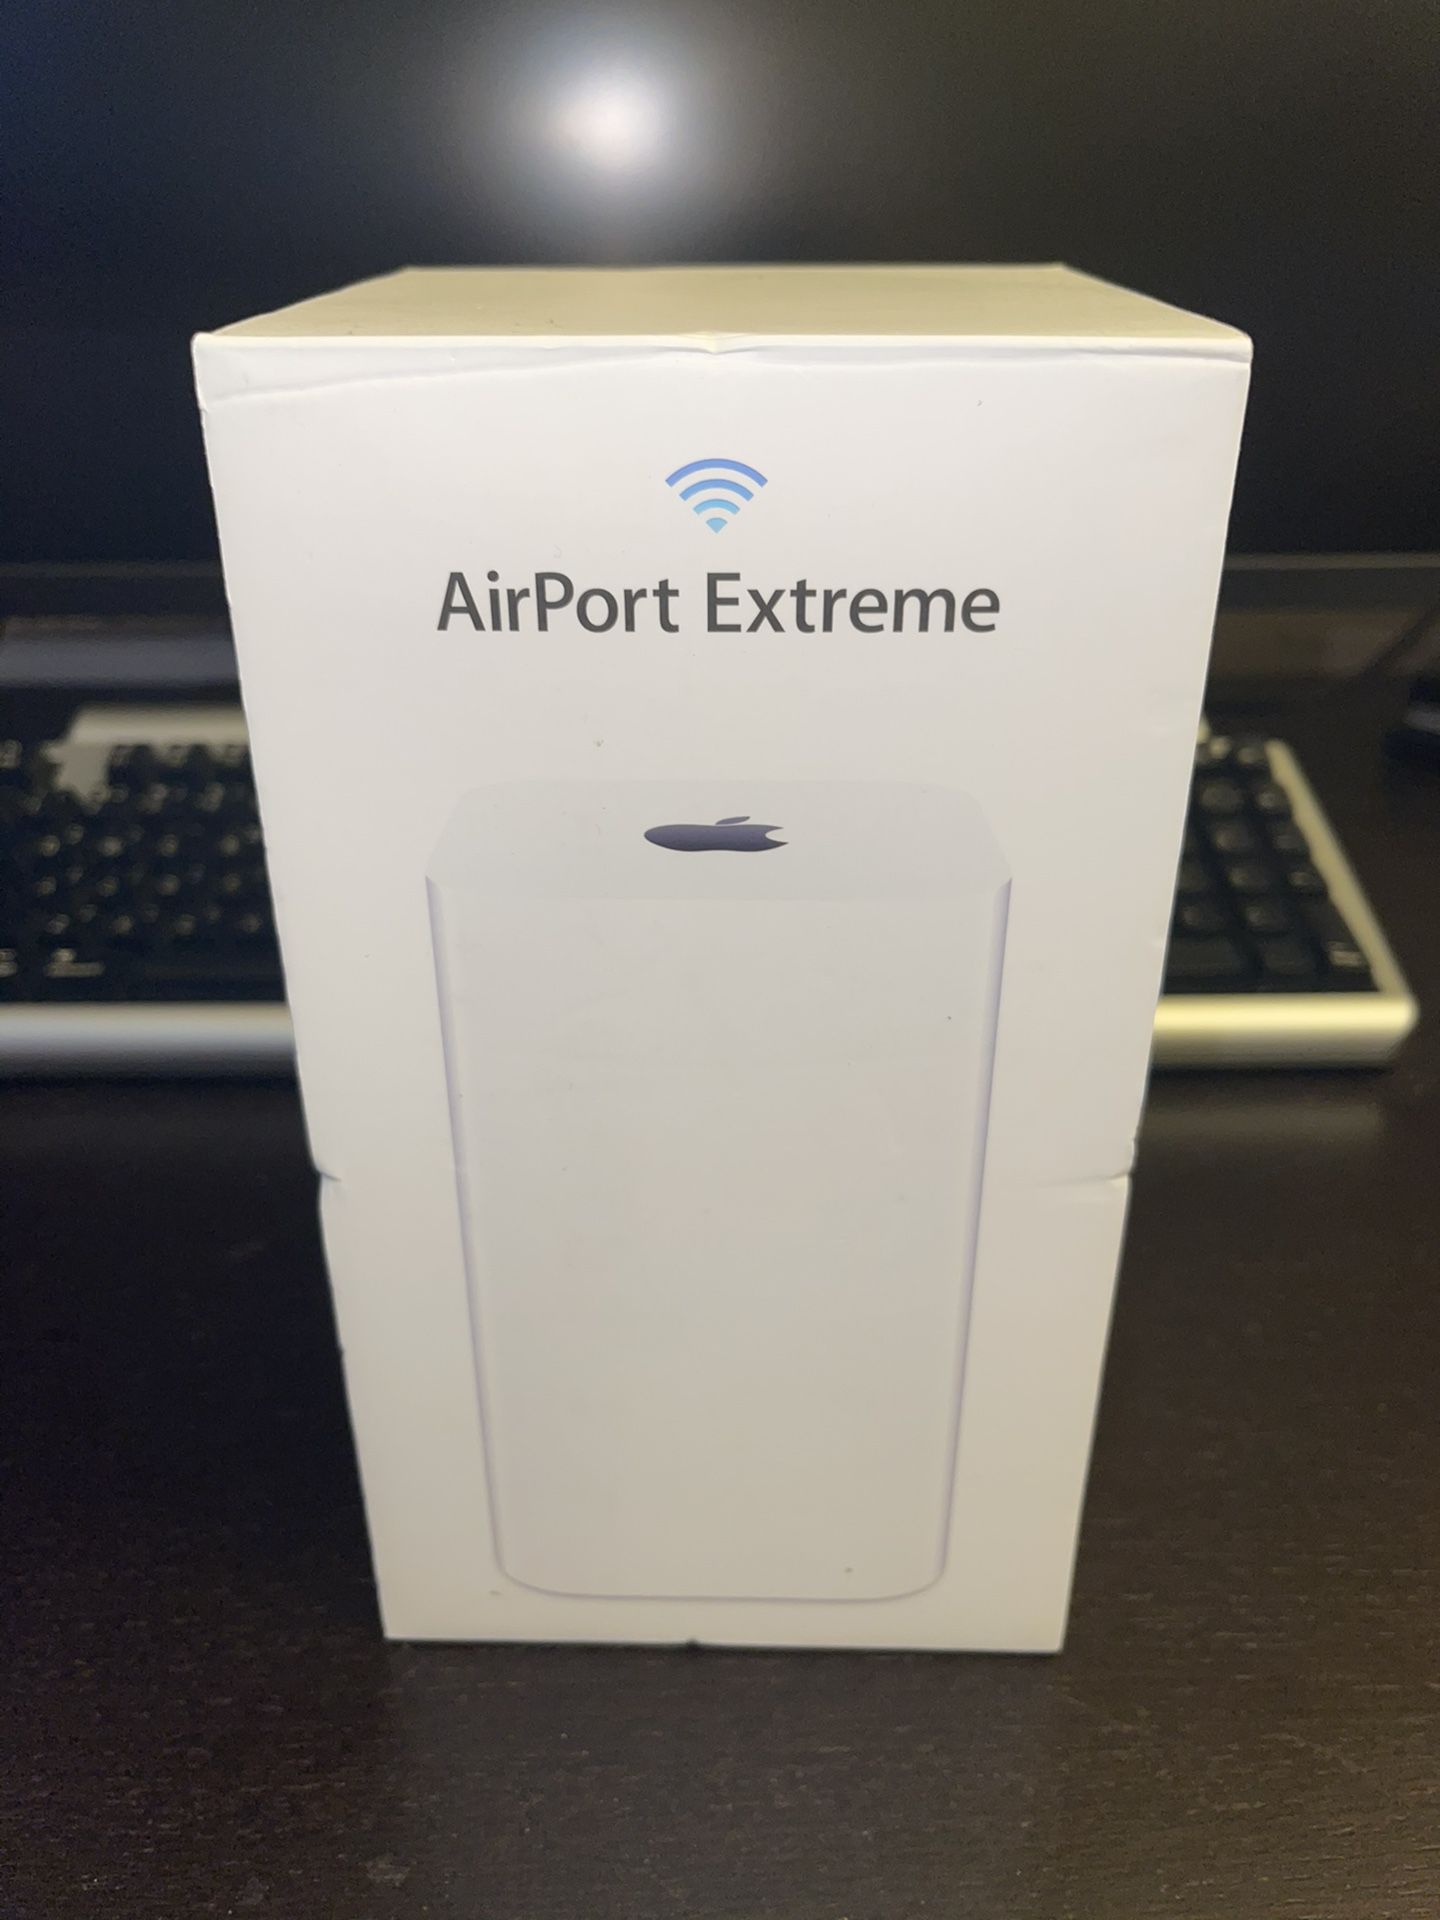 Apple AirPort Extreme WiFi Router